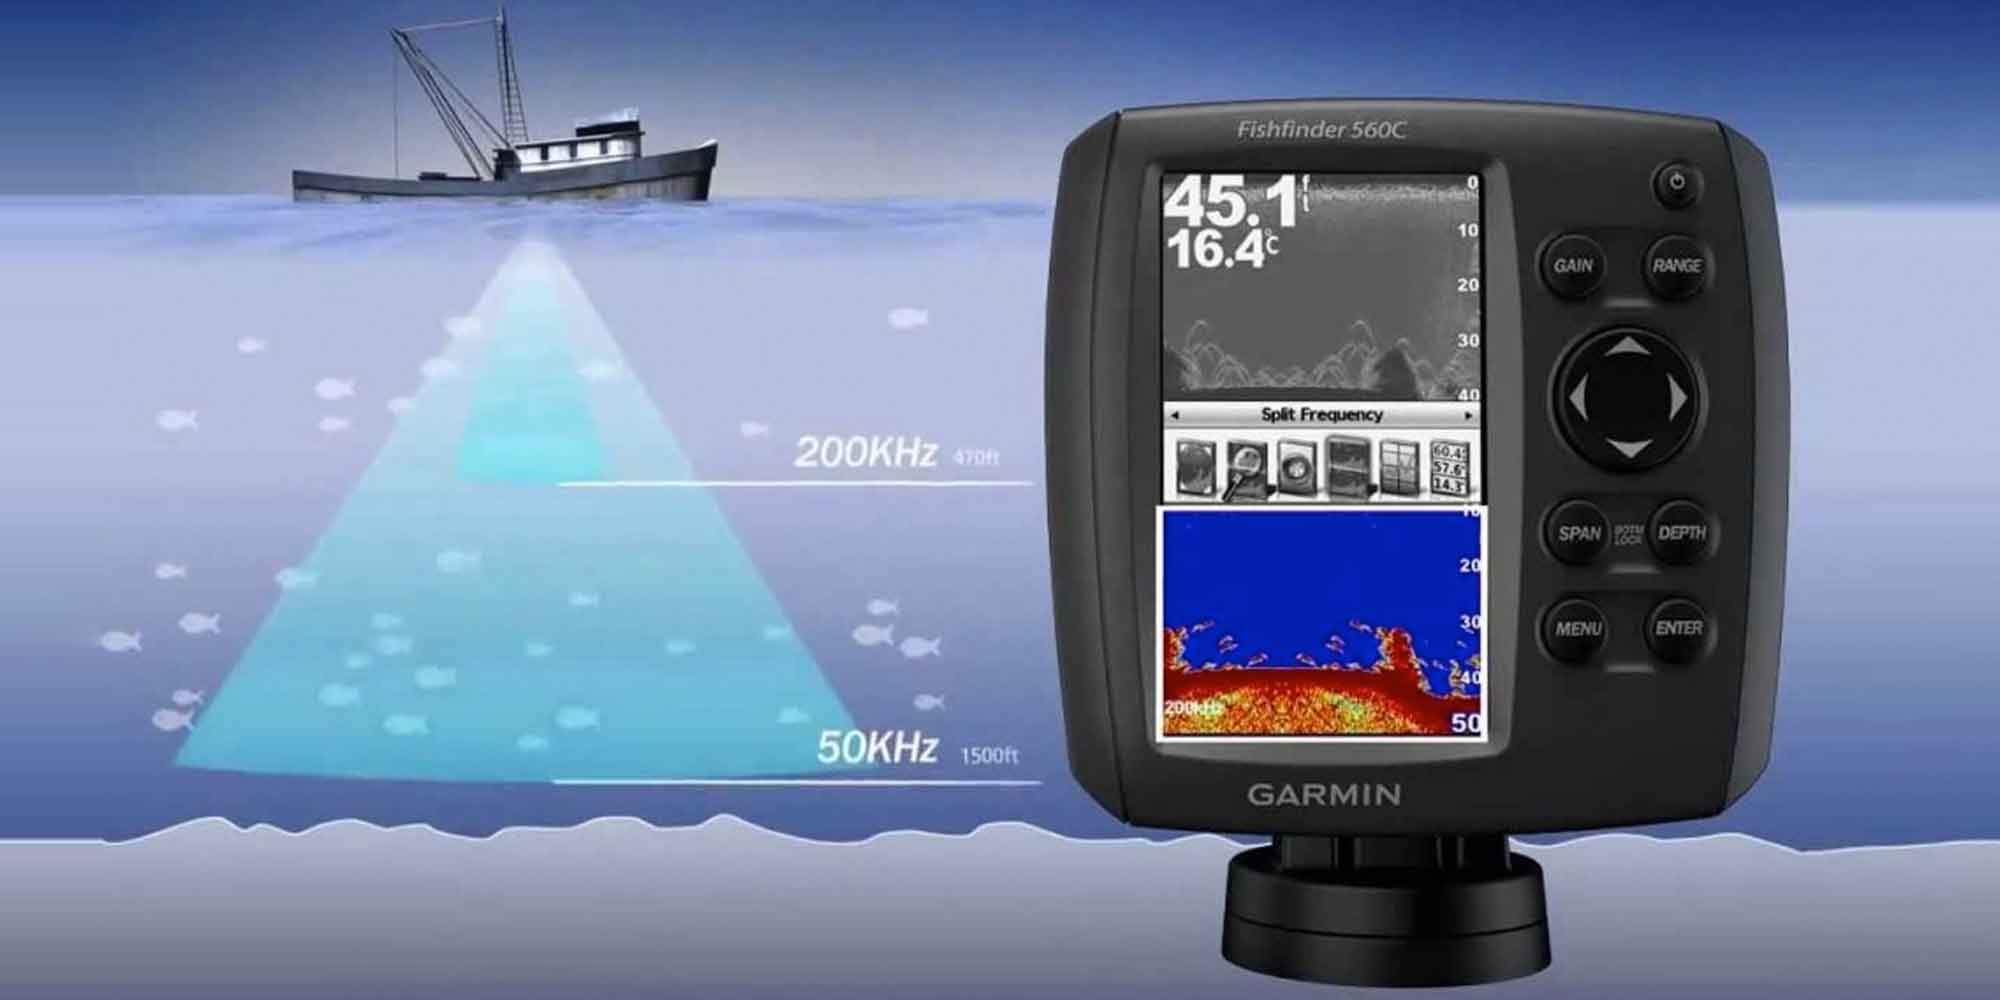 6 Ways The Garmin Fish Finder Will Make Your Life Easier